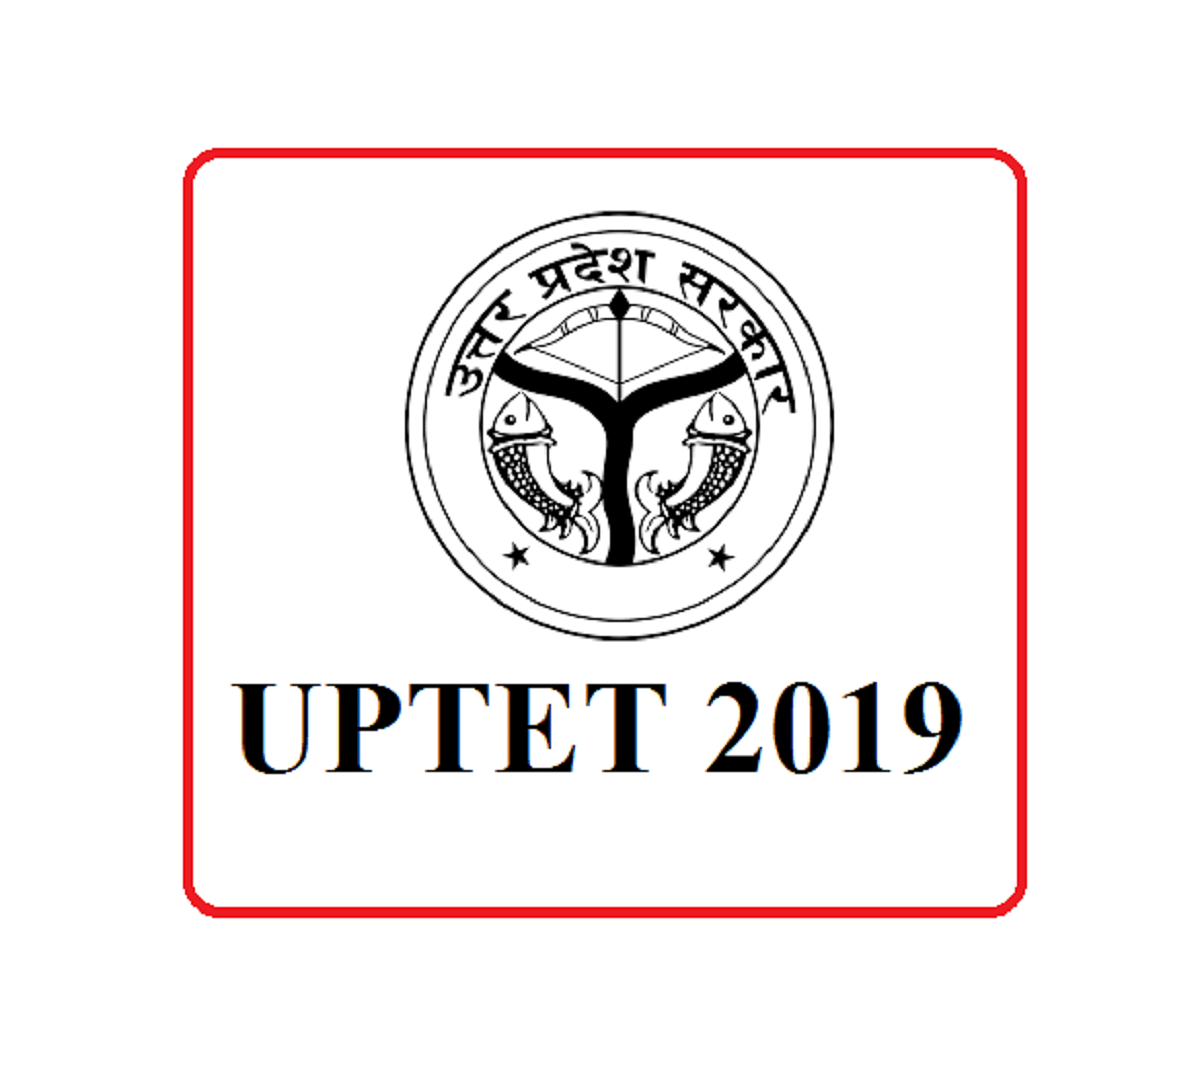 UPTET 2019: Go Through the Detailed Information to Avoid any Confusion